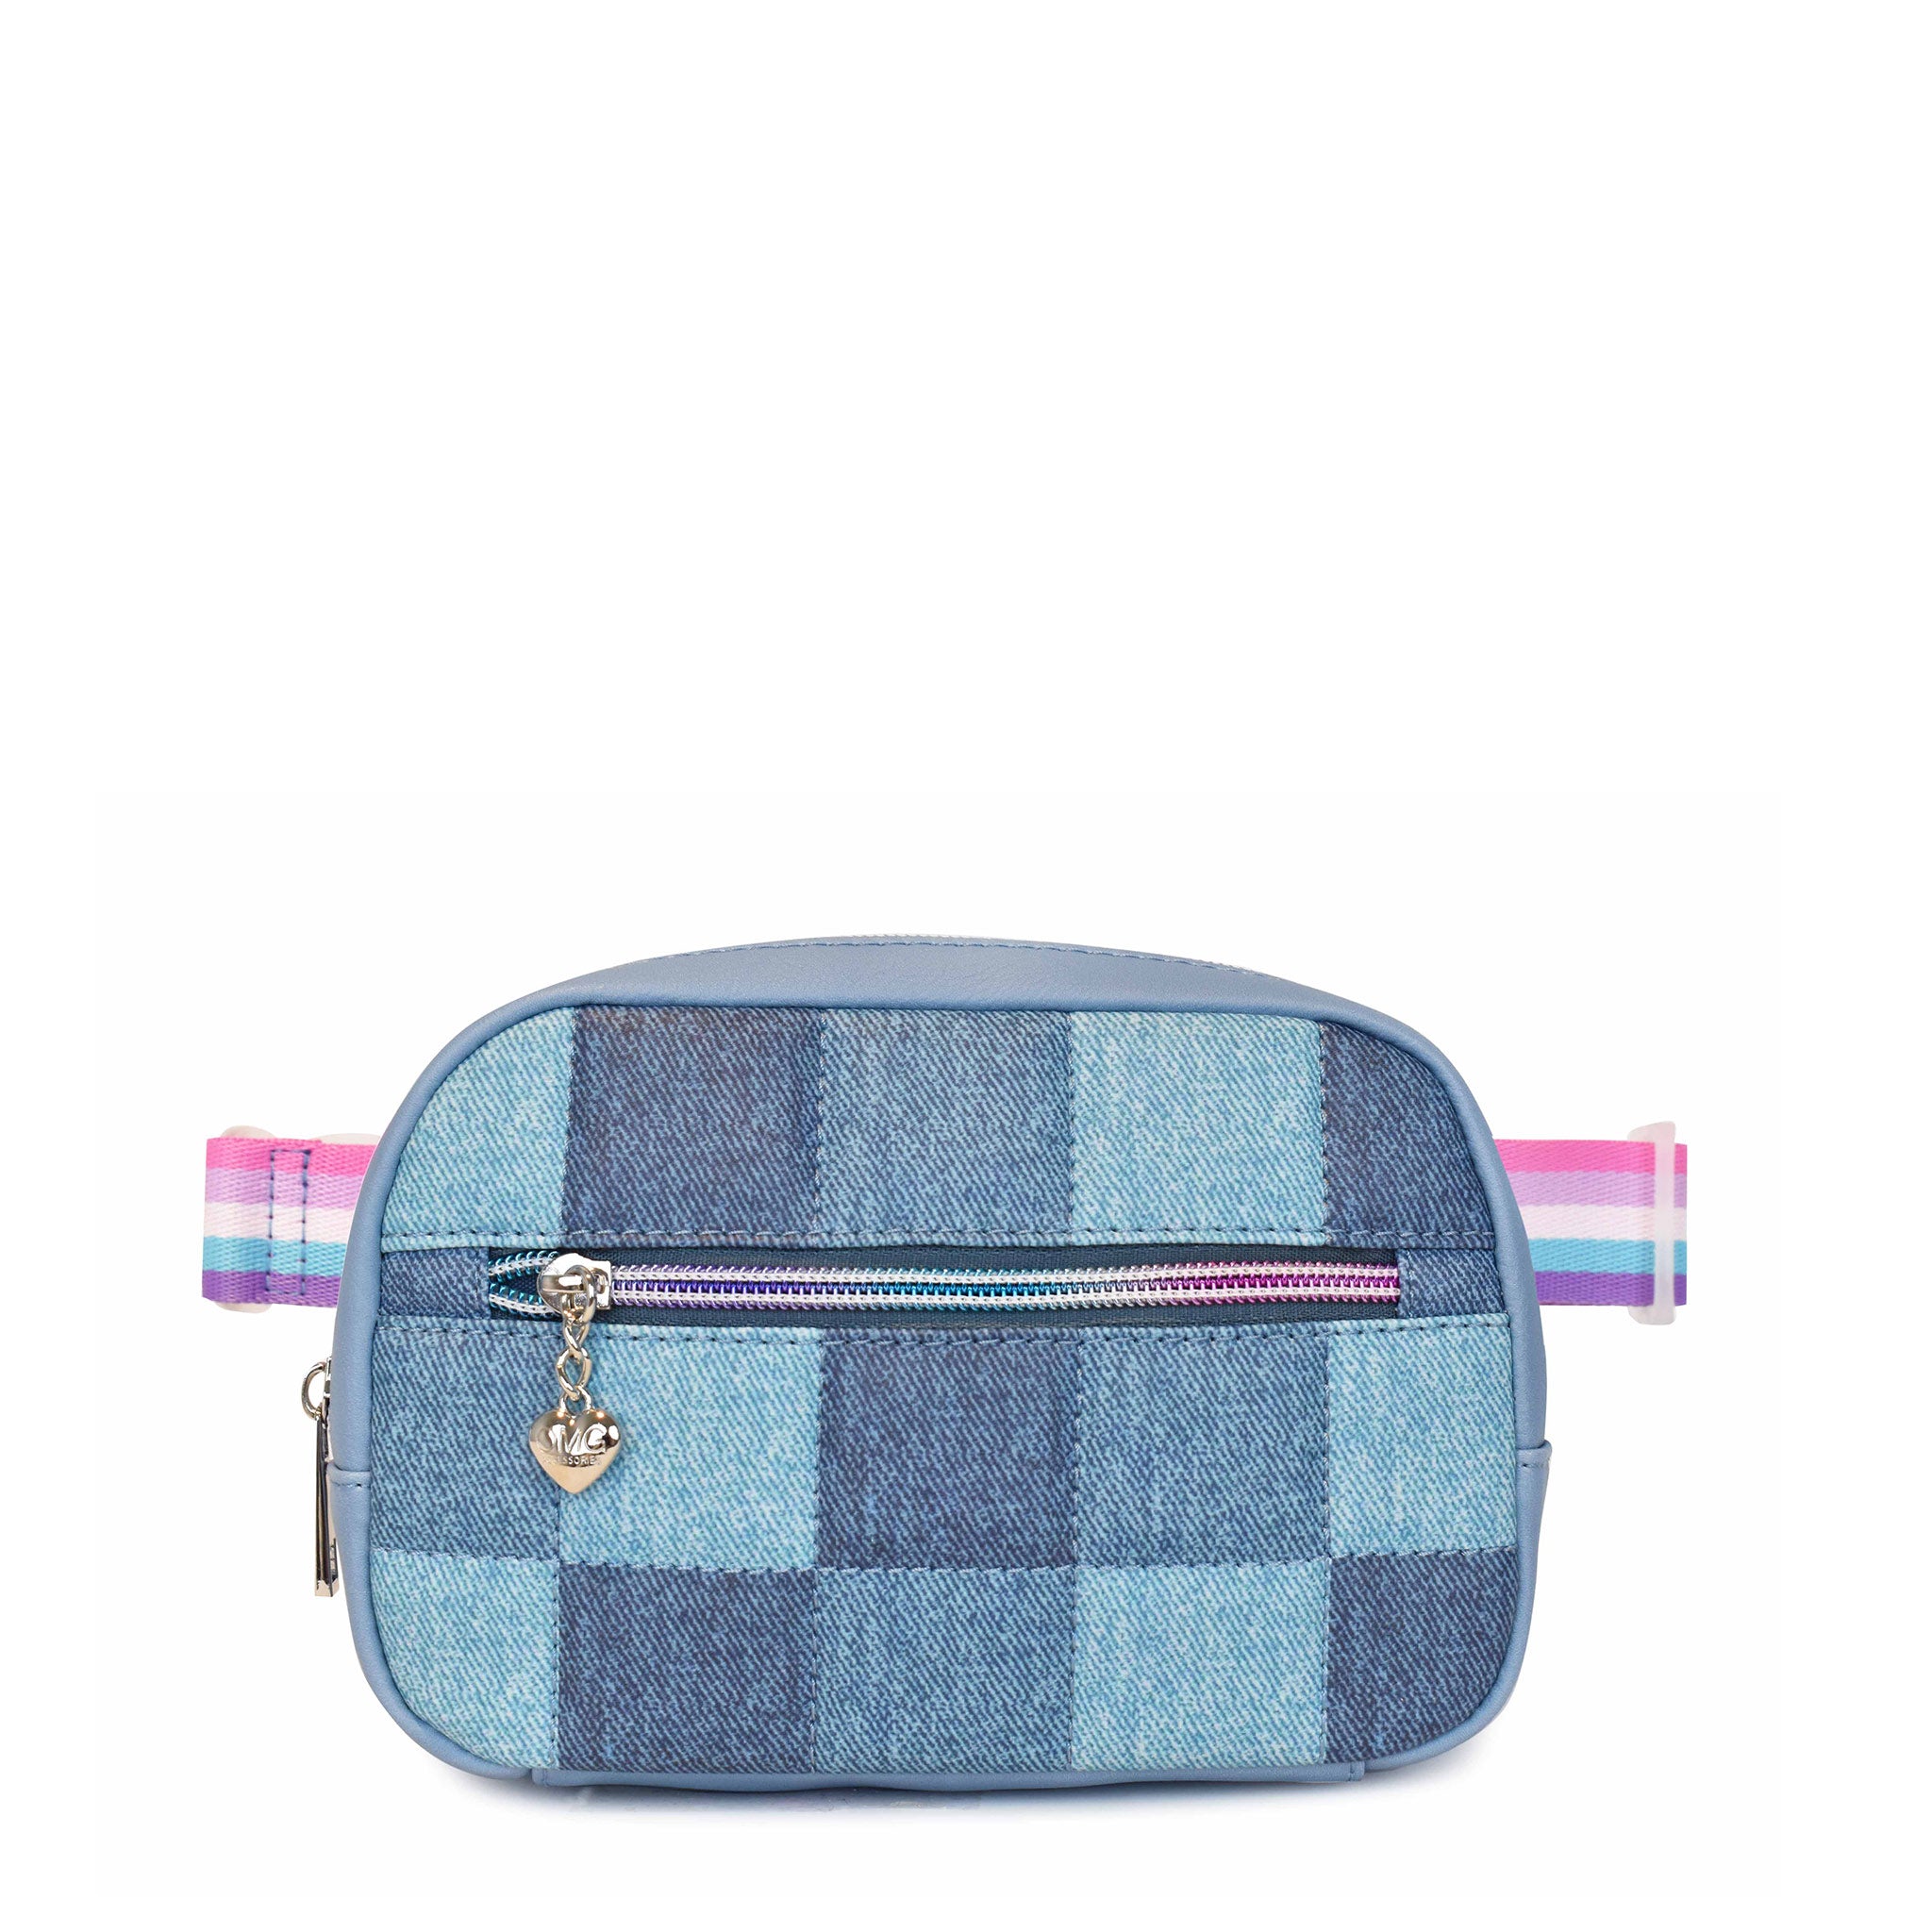 Front View of a Rectangular Denim Checkerboard Belt Bag with adjustable strap